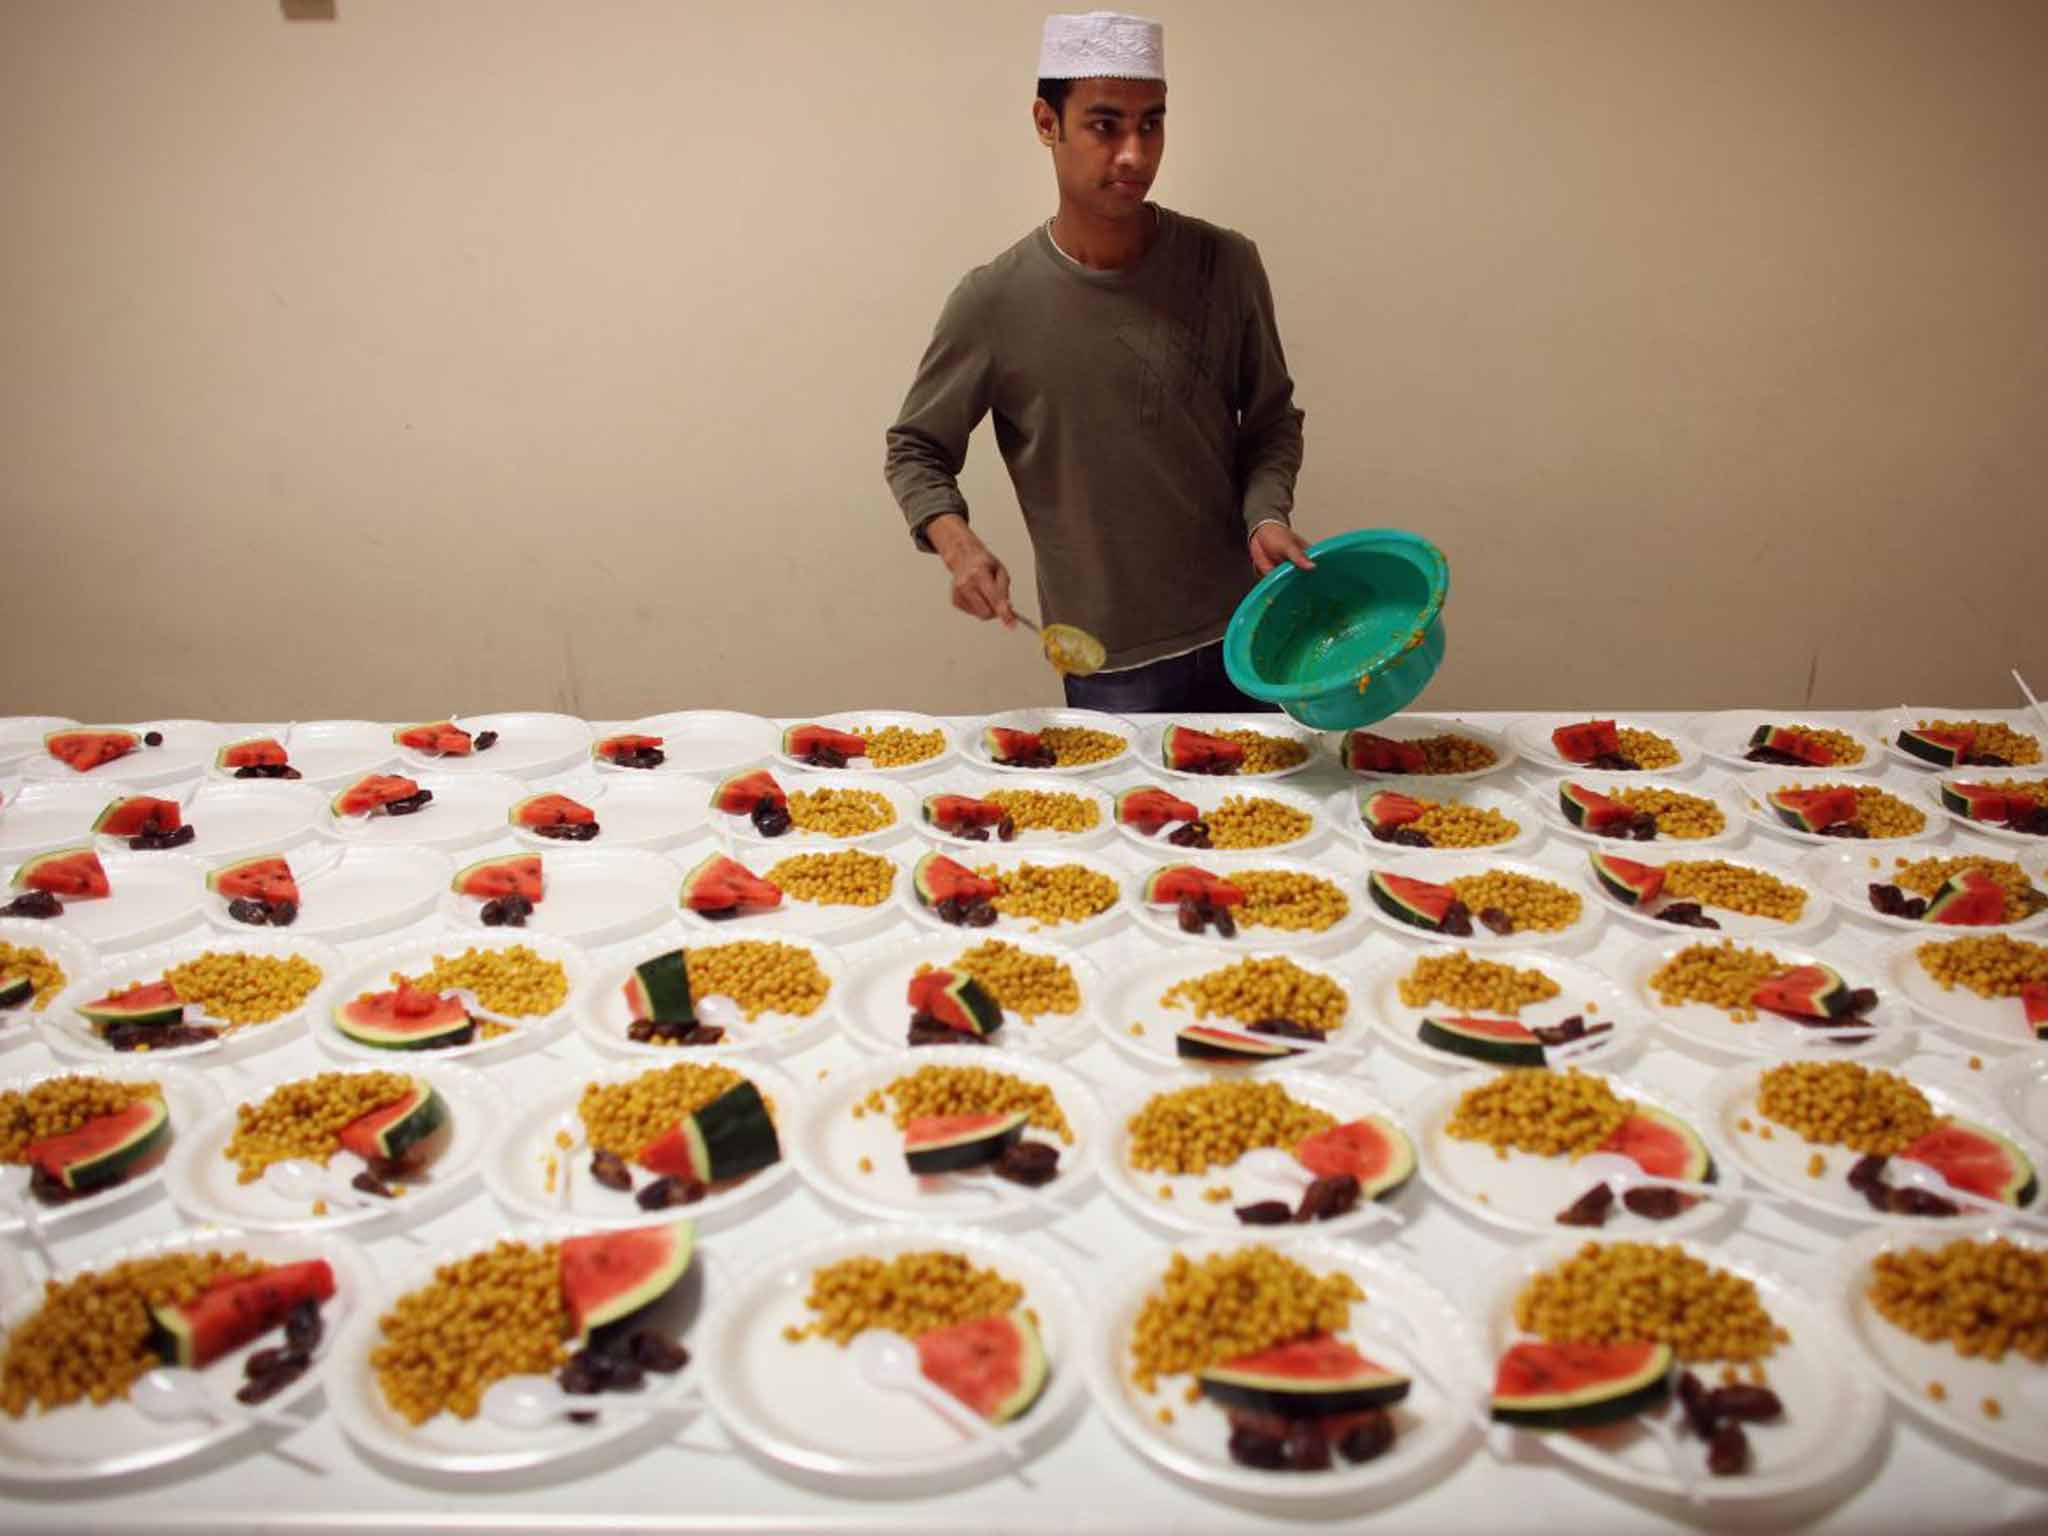 After dark: dinner is served at a London mosque